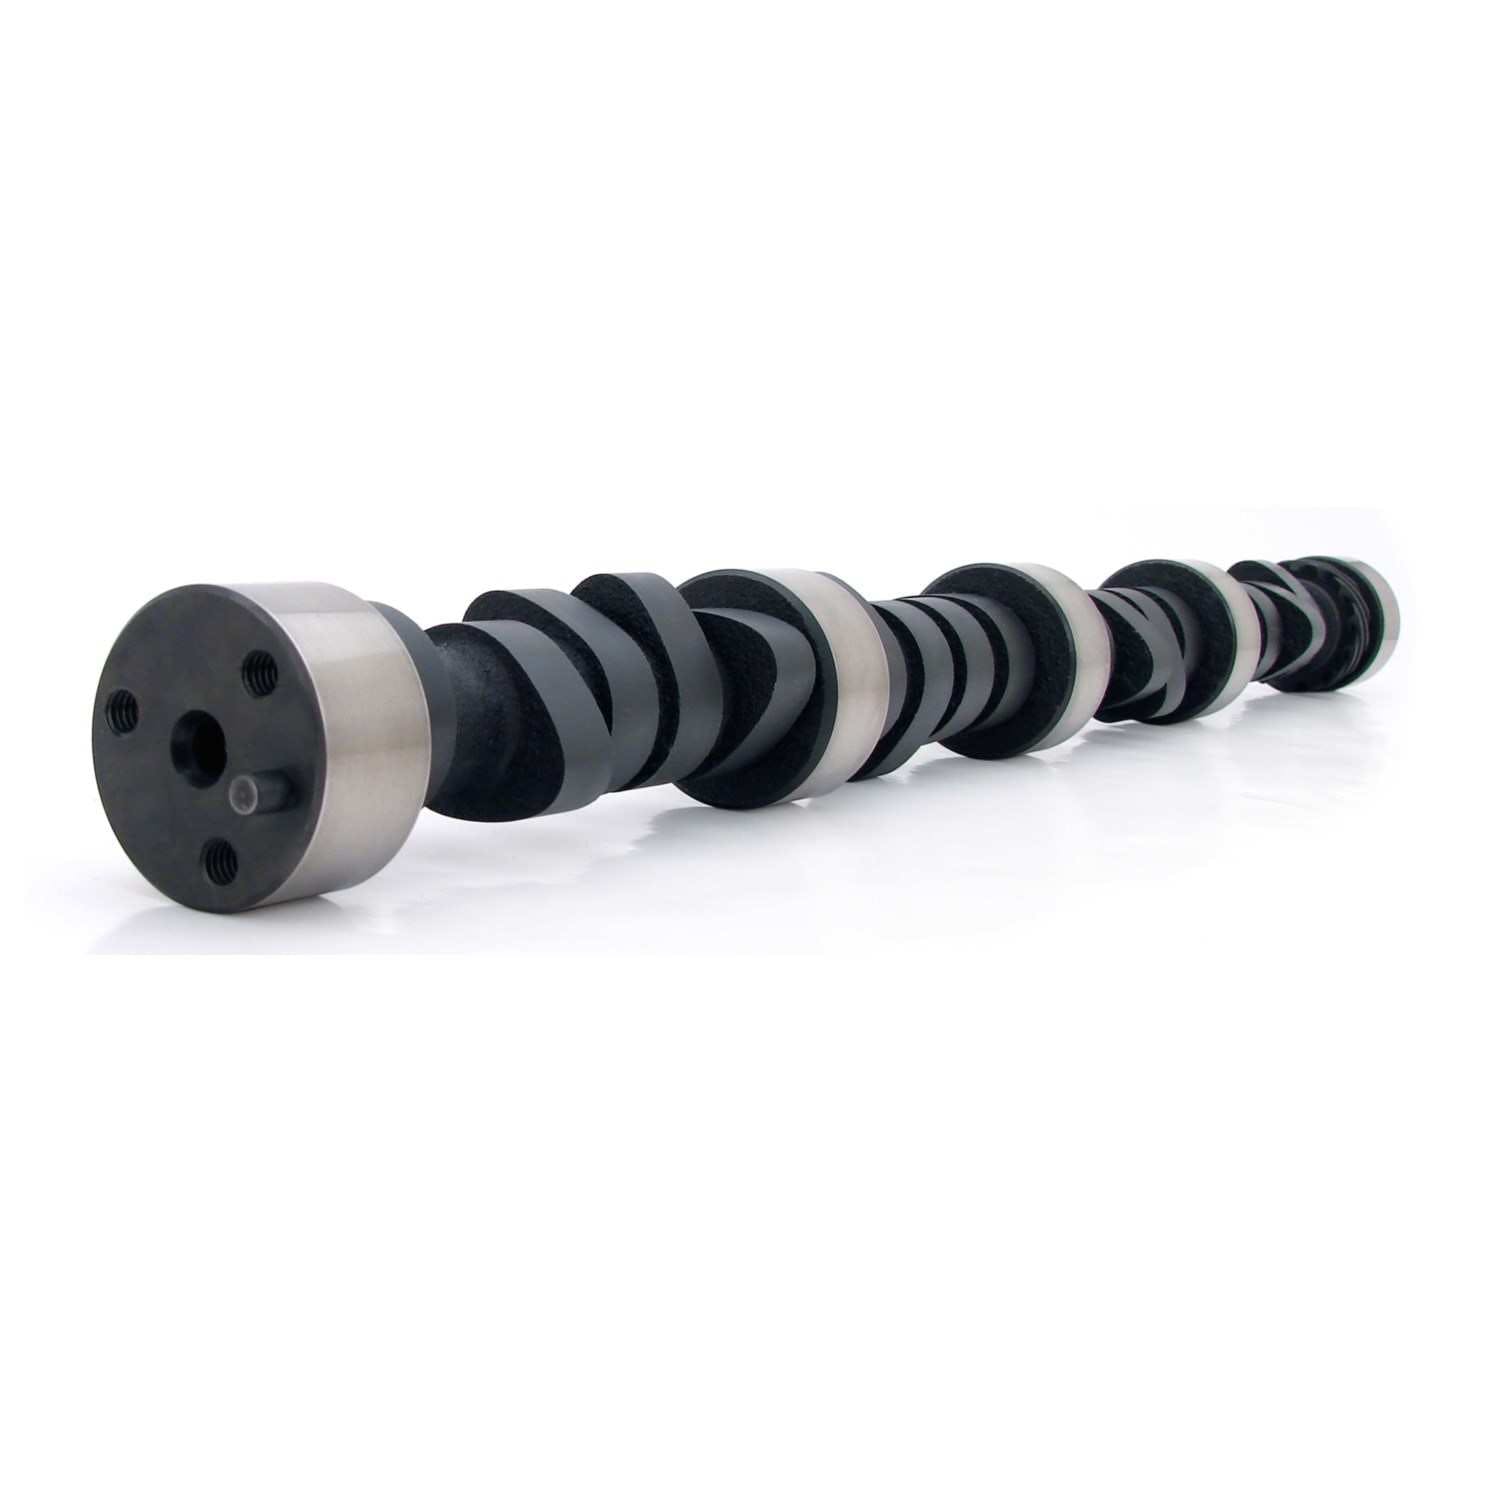 Competition Cams 11-601-20 Nitrided Mutha Thumpr Camshaft